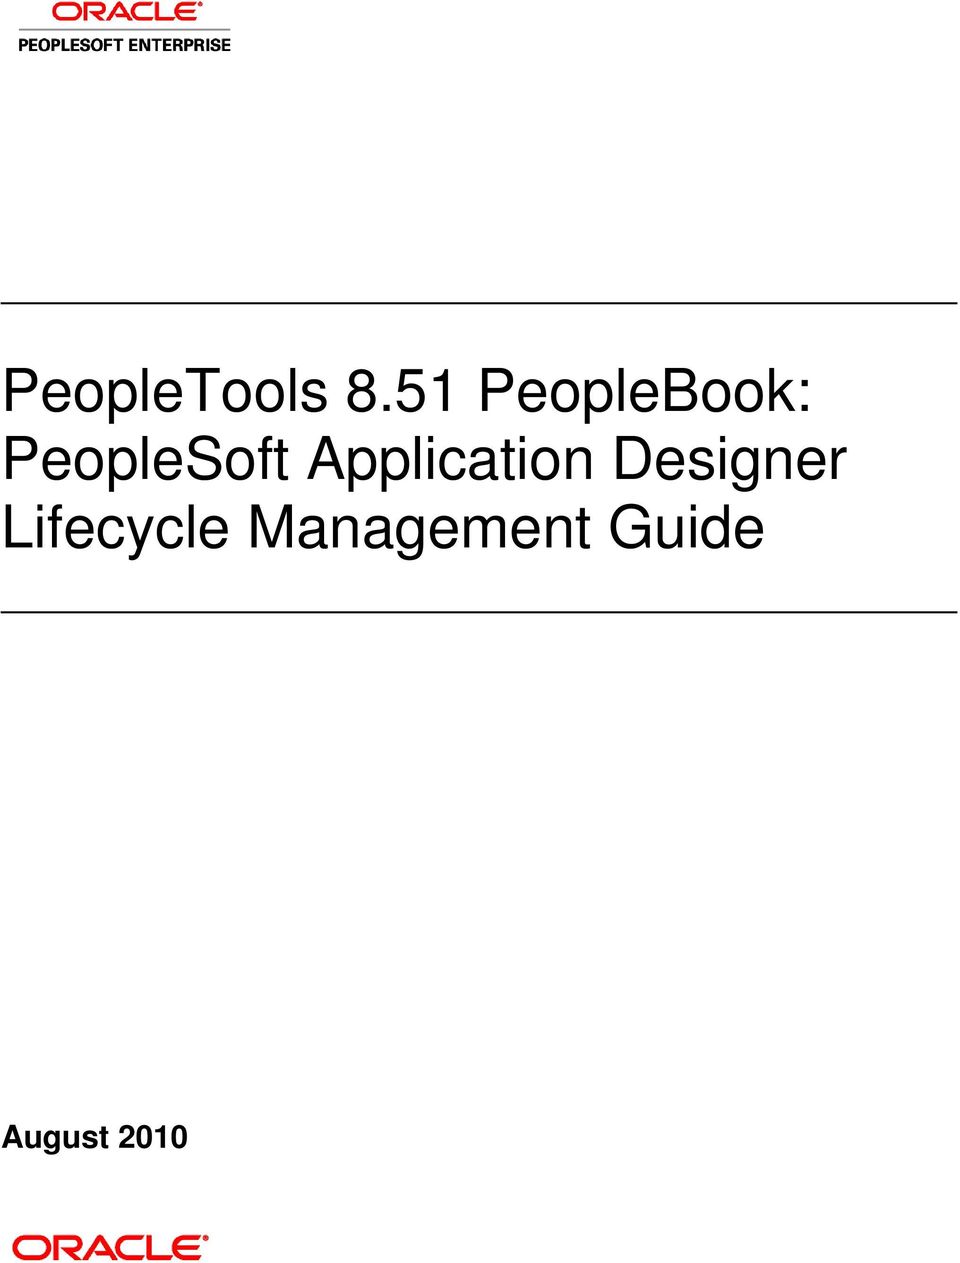 PeopleSoft Application